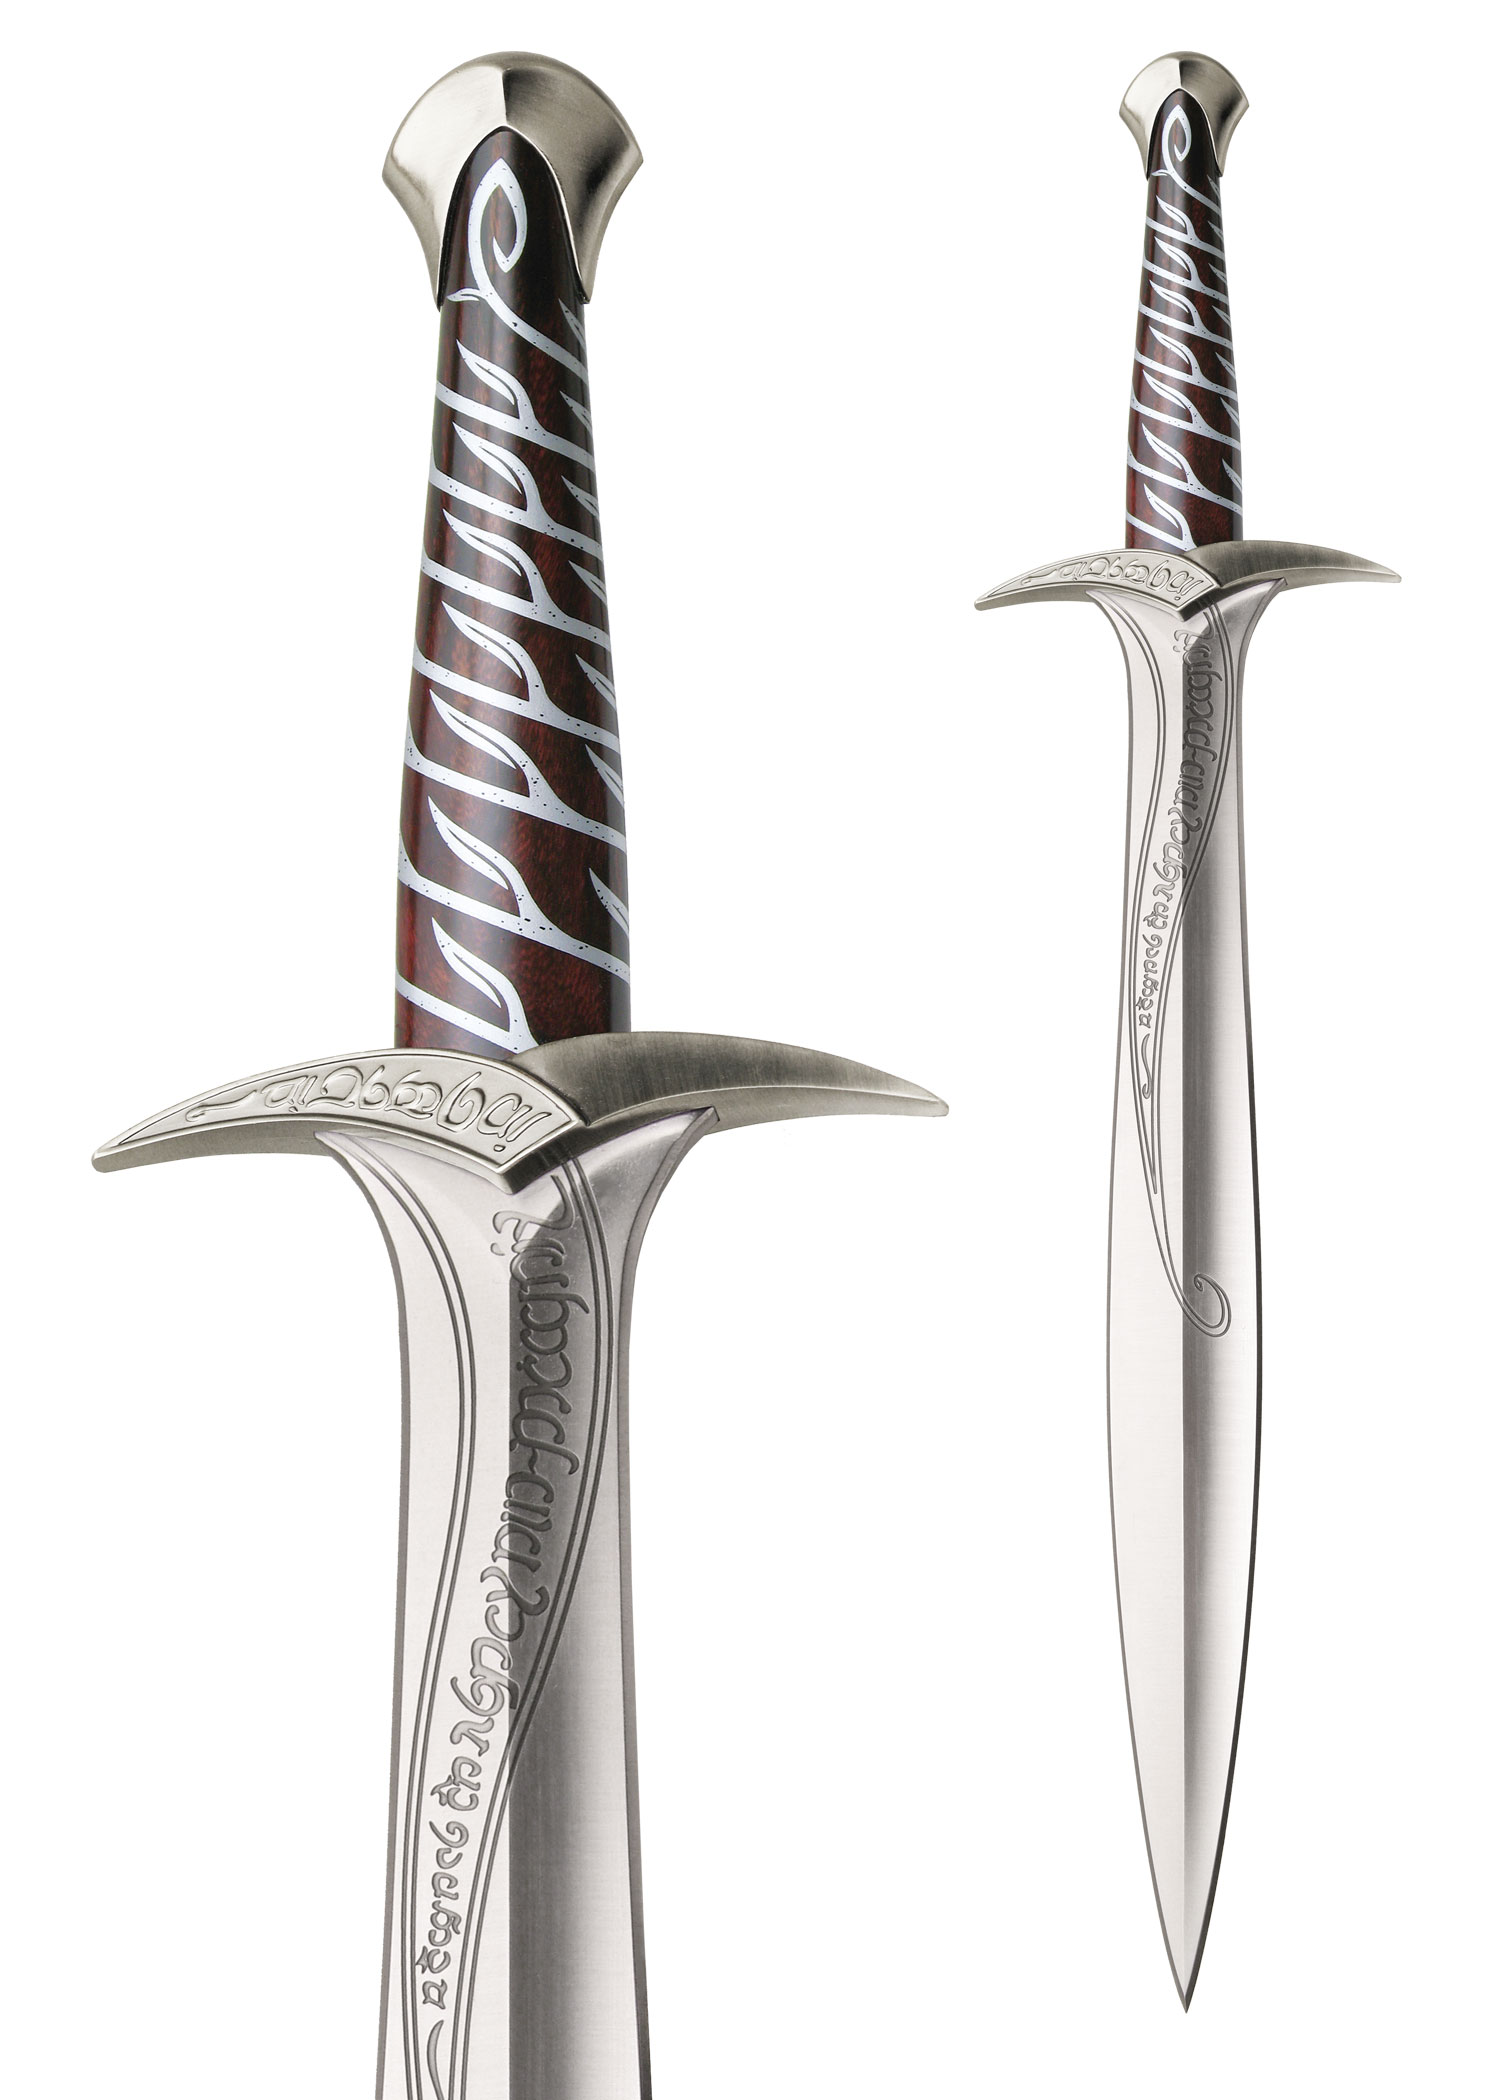 24" Sting Sword of Frodo lord of the ring replica 